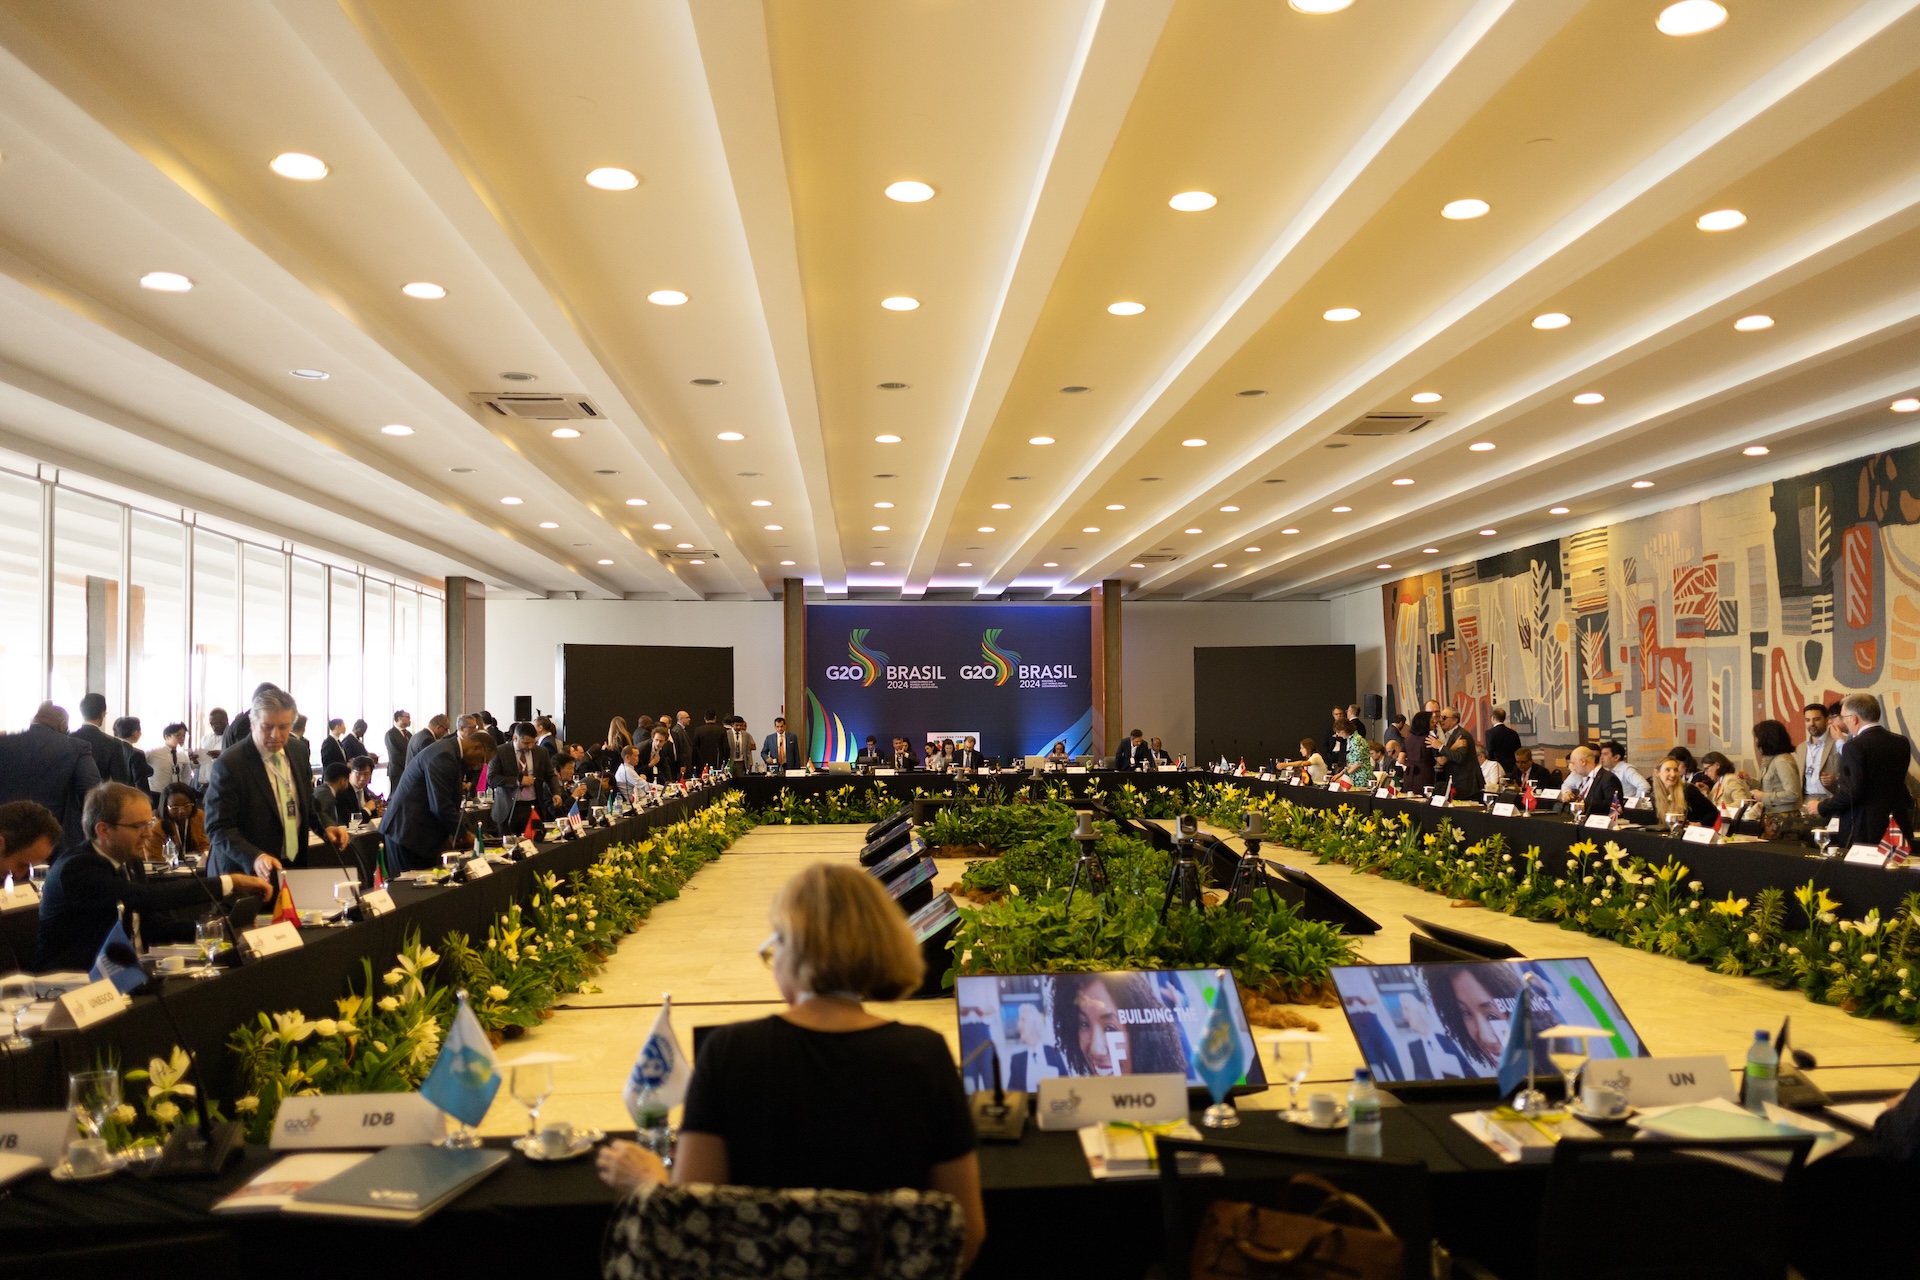 G20 authorities begin strategic dialogues about international challenges in Brasil. Photo: Audiovisual/G20 Brasil